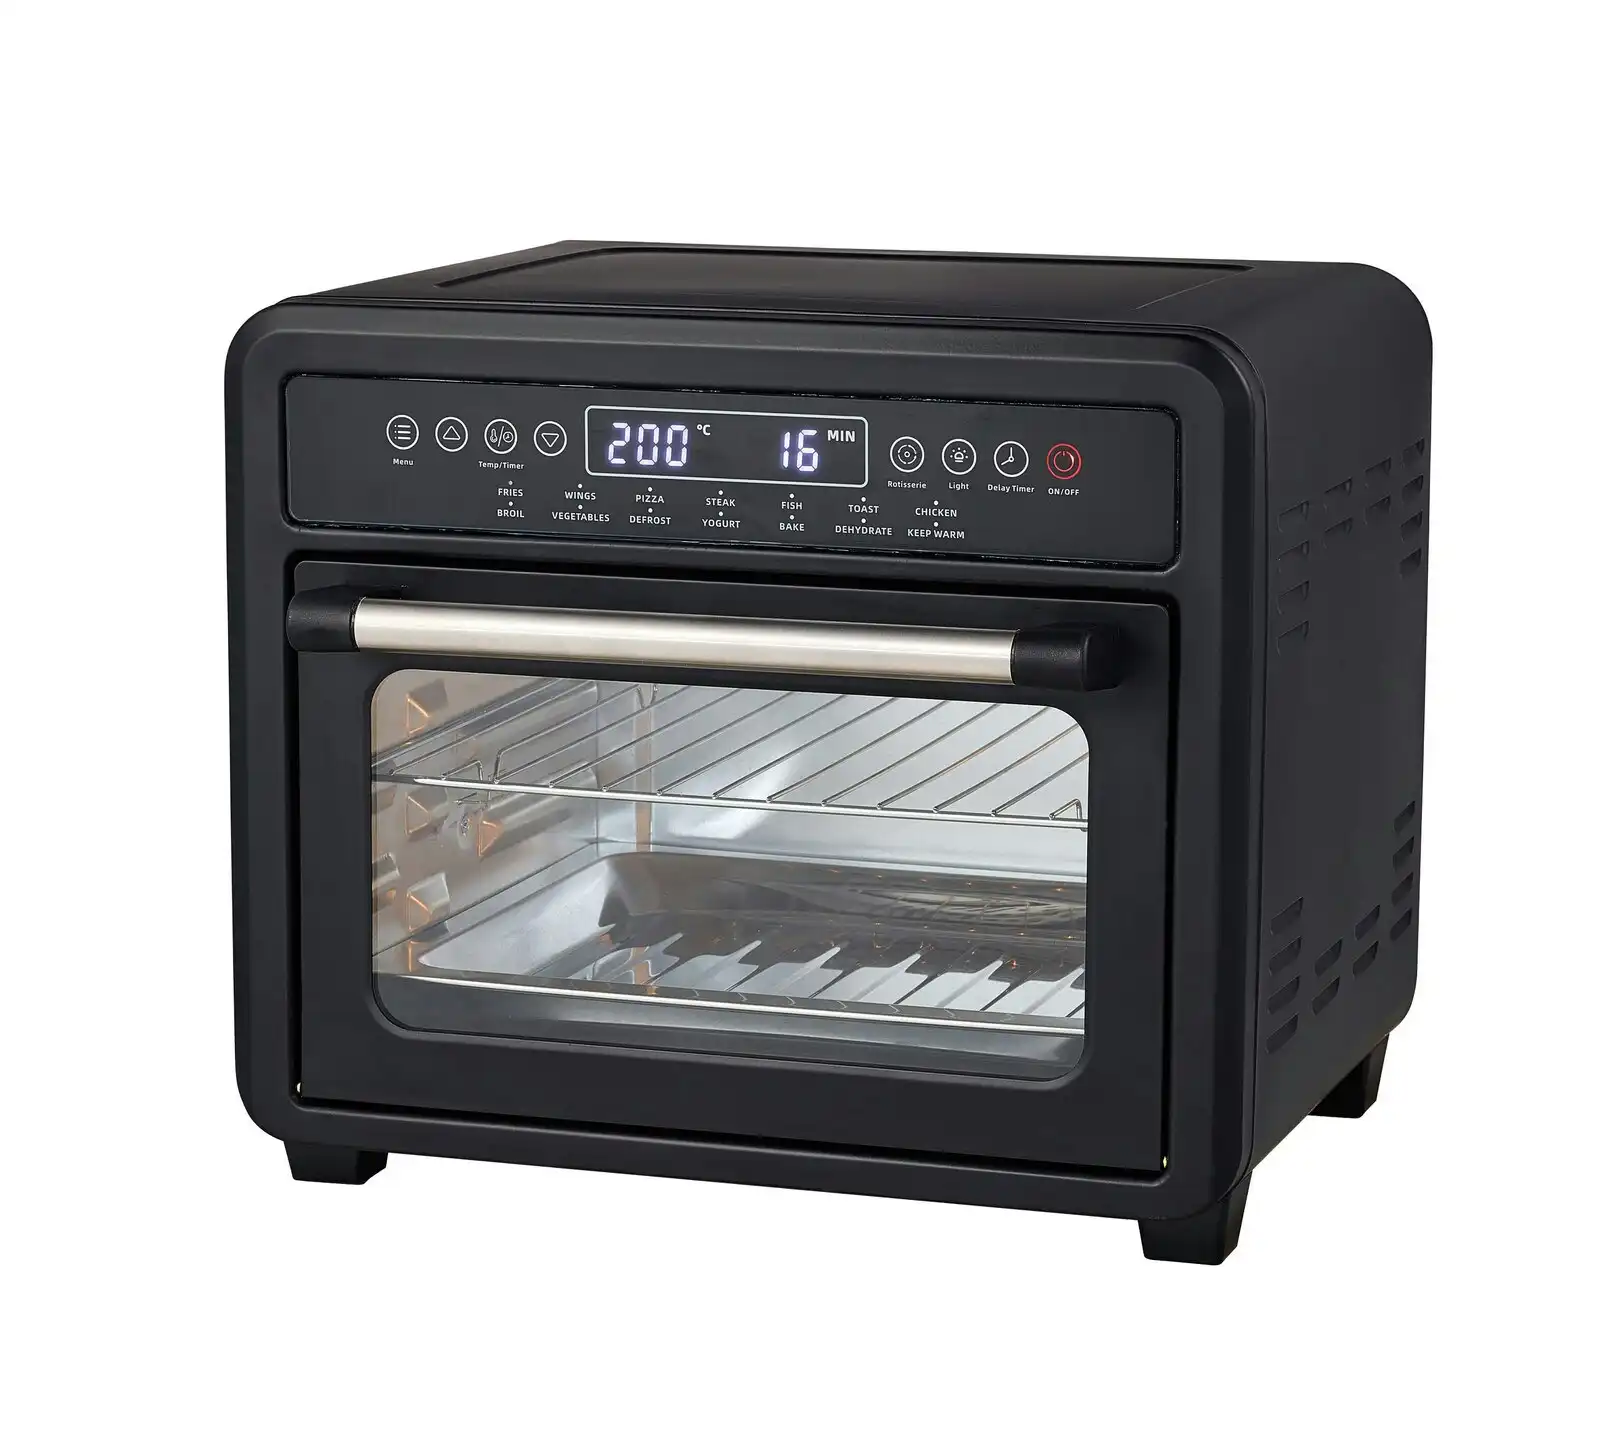 23L Digital Air Fryer Convection Oven with 12 Cooking Programs